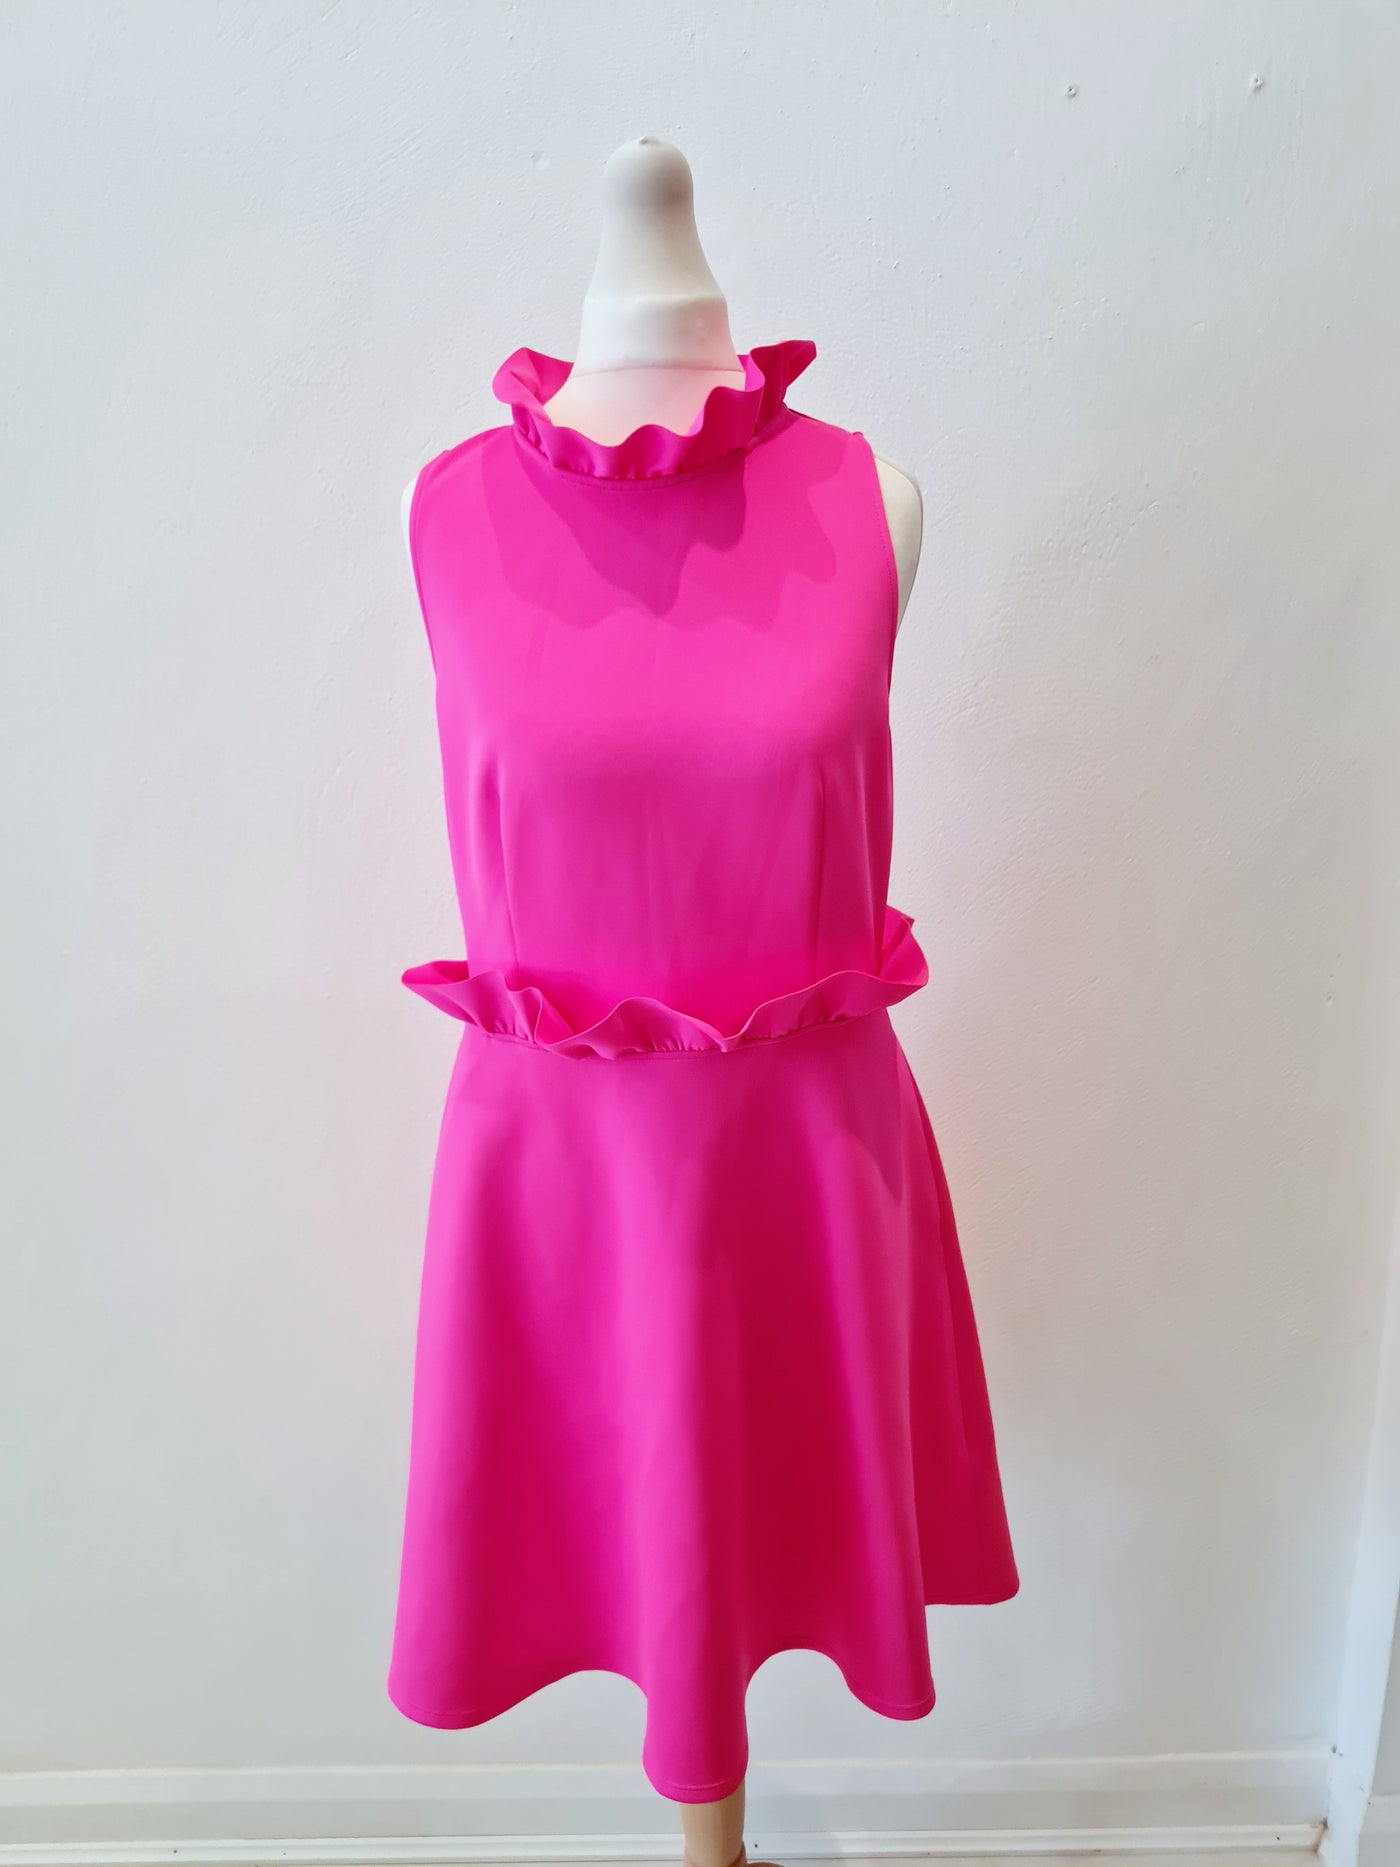 Ted Baker neon pink dress 3 New RRP £139